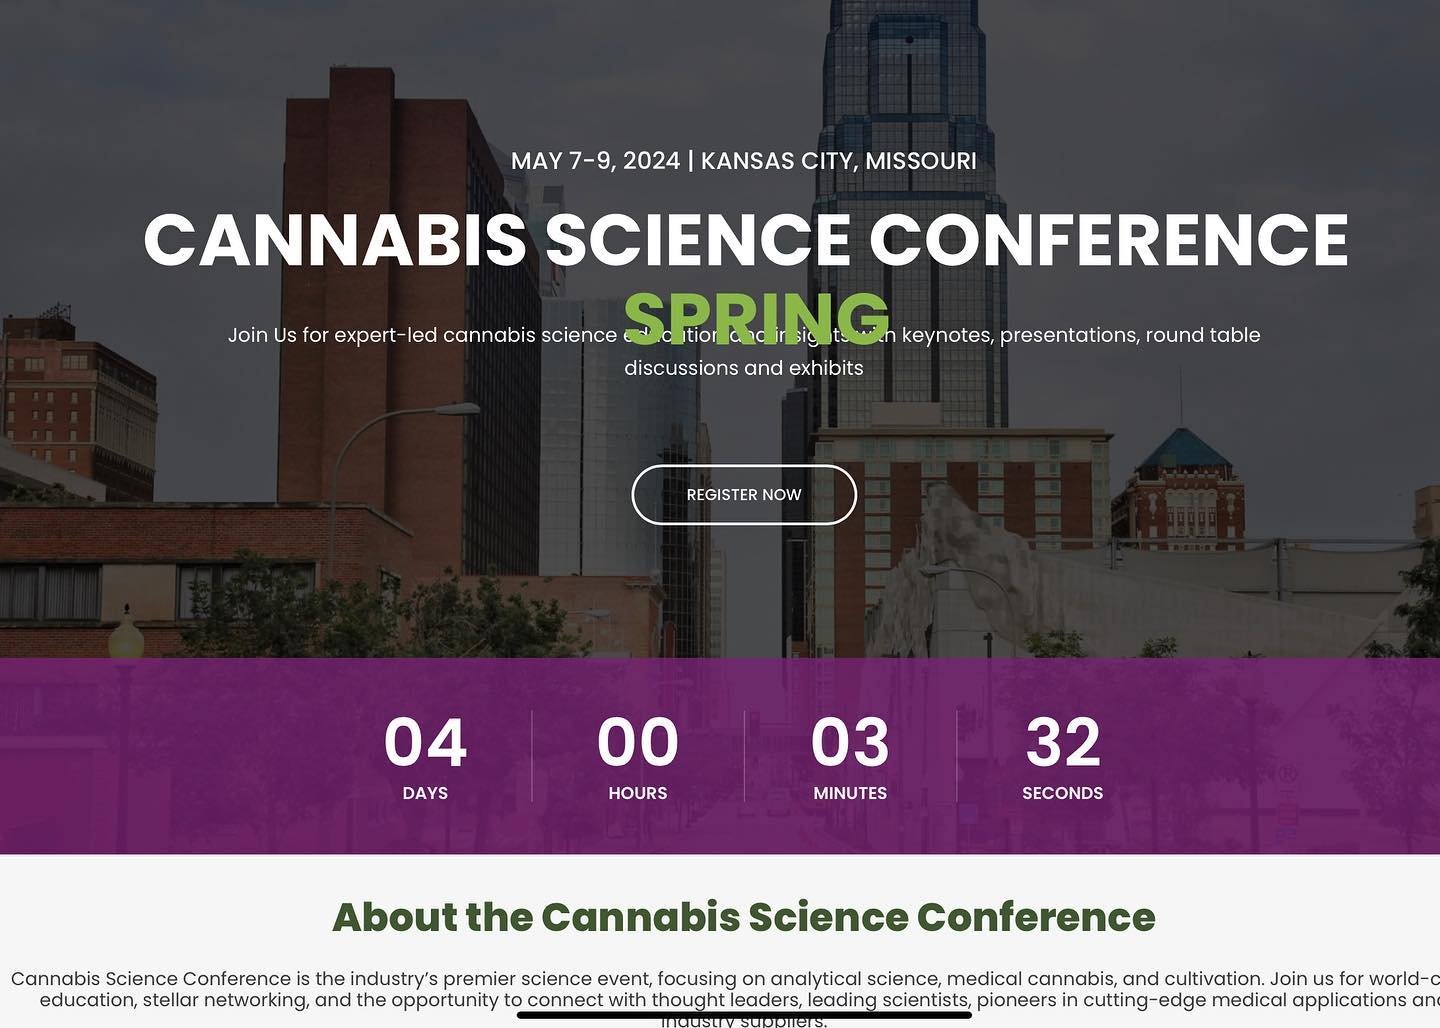 ~. #sciencefriday 
We are heading east next week for another science conference with several days of lectures.  This one has four tracks of interest: Cultivation, Analytical, Compliance and Medical, with a leaning focus on healthcare. 
~
When we retu